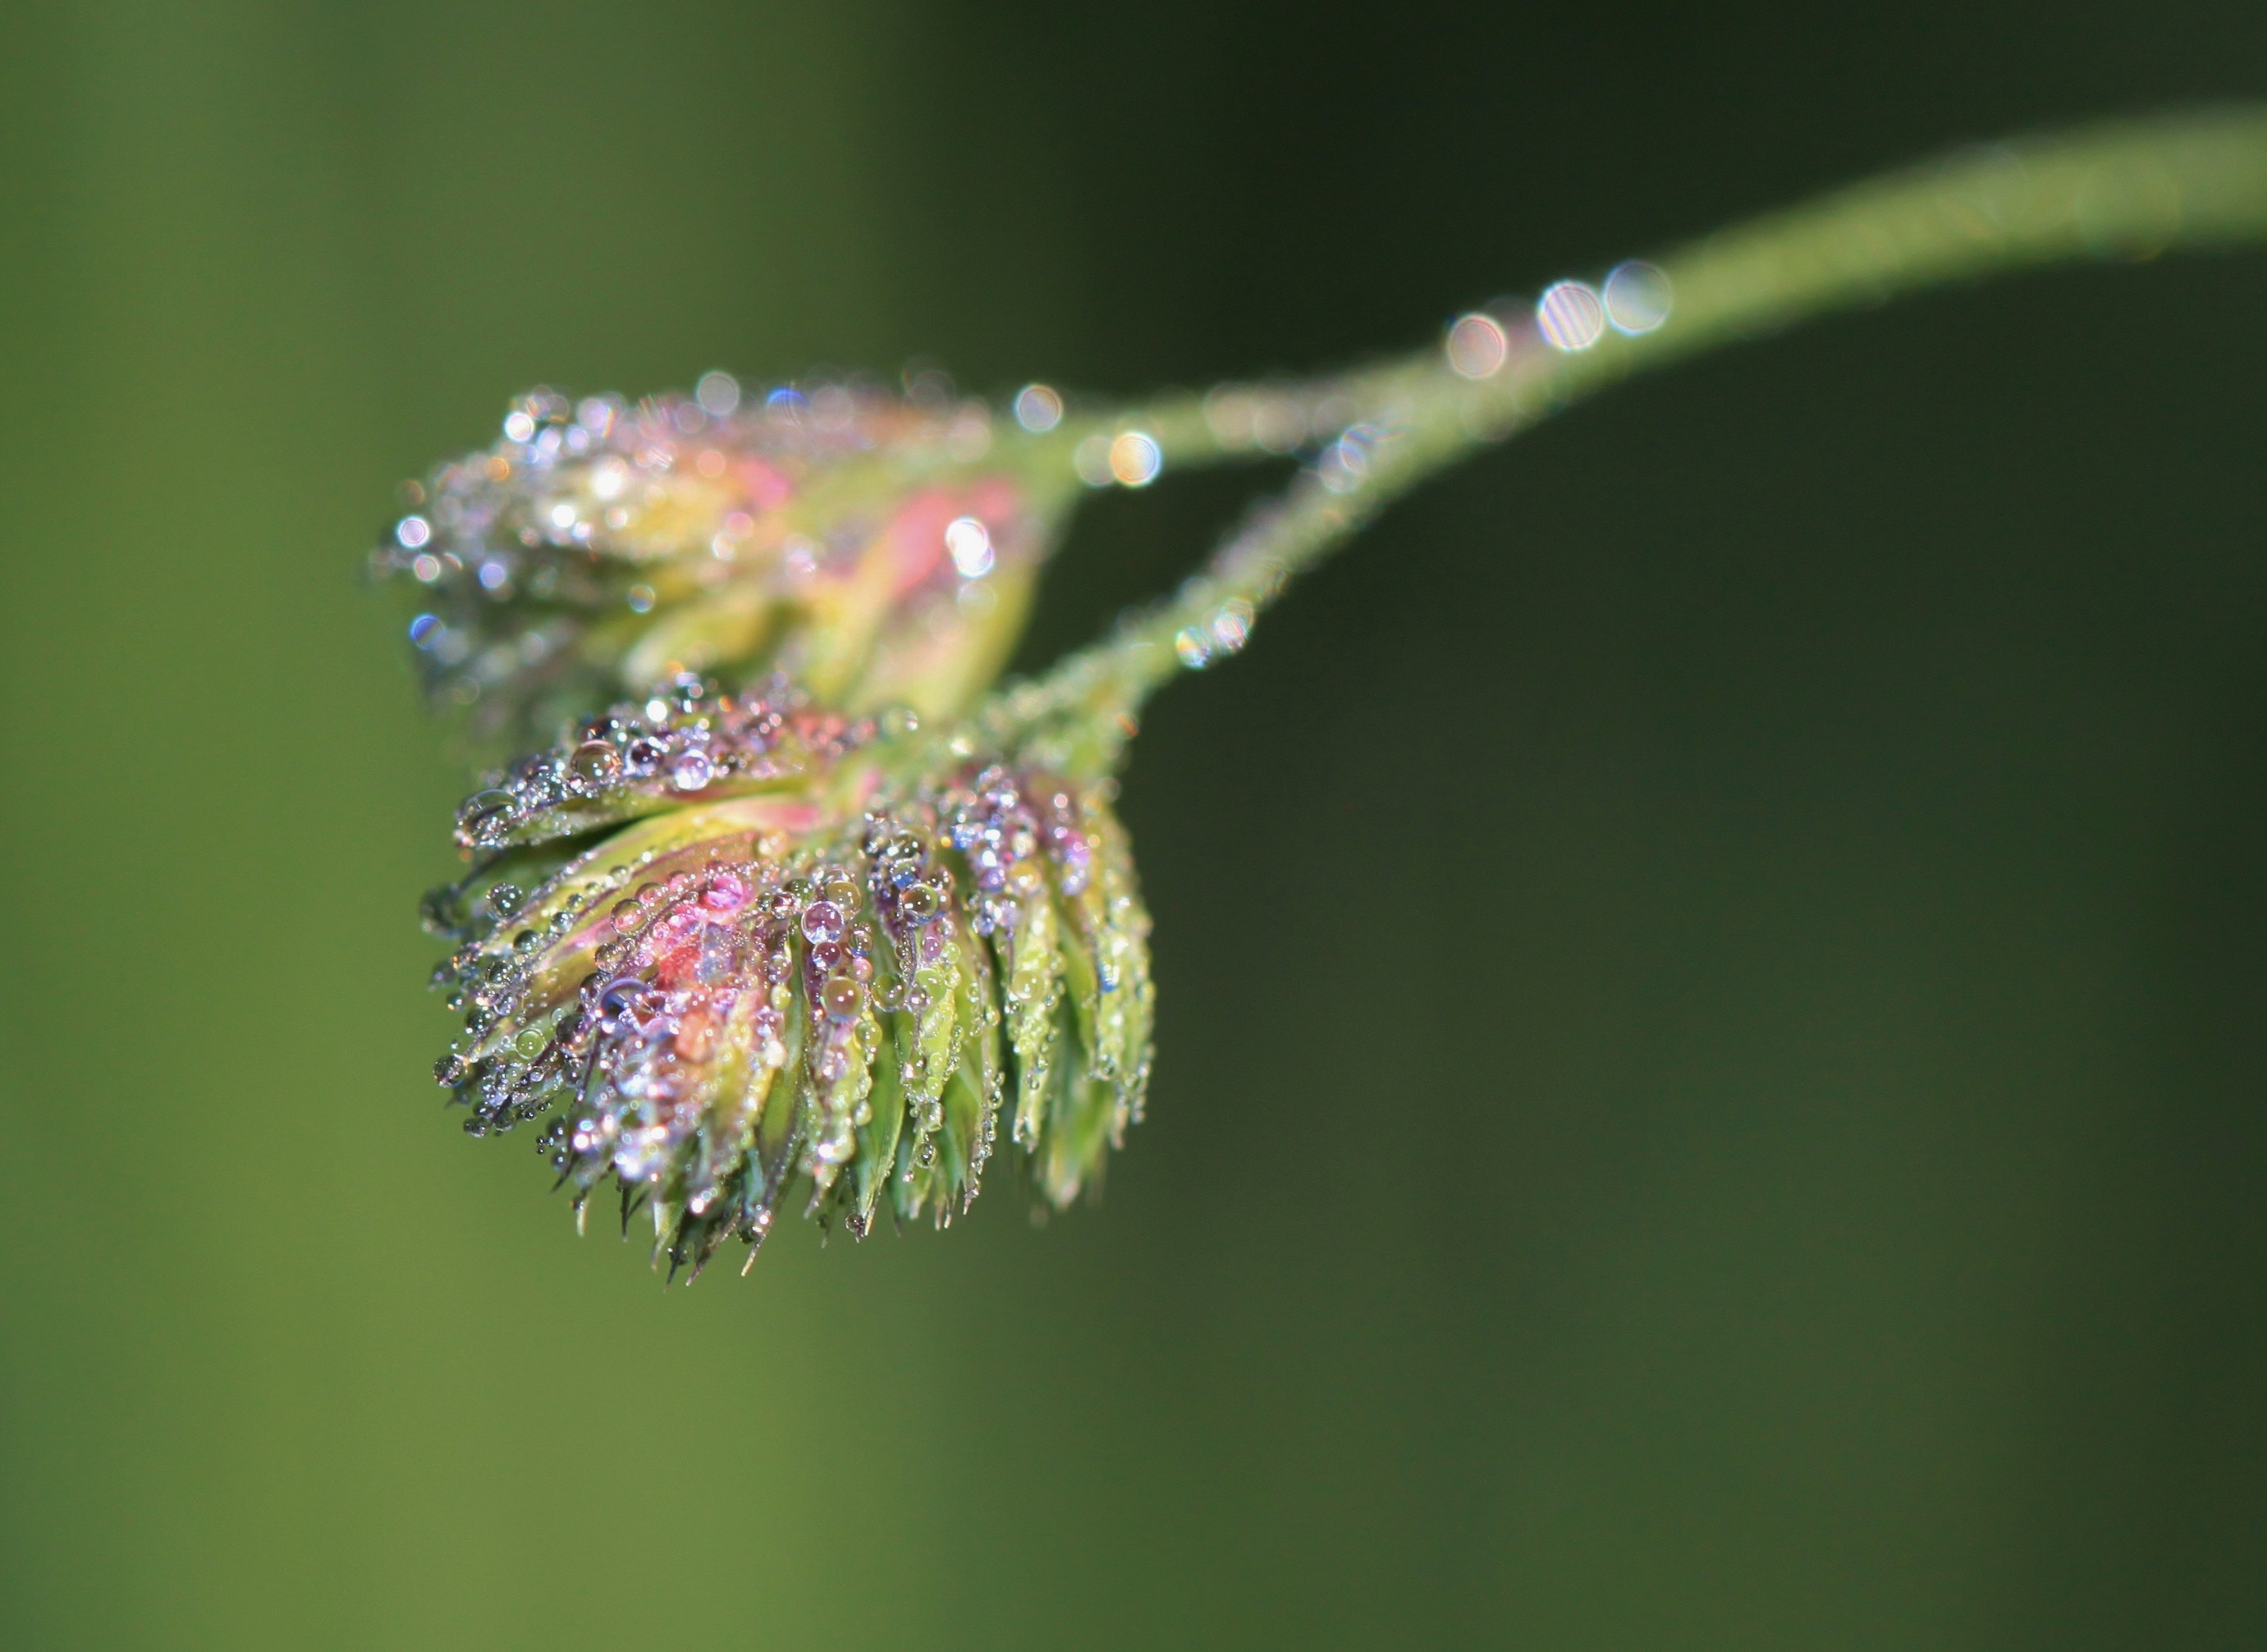 Dewdrops on the plant photo